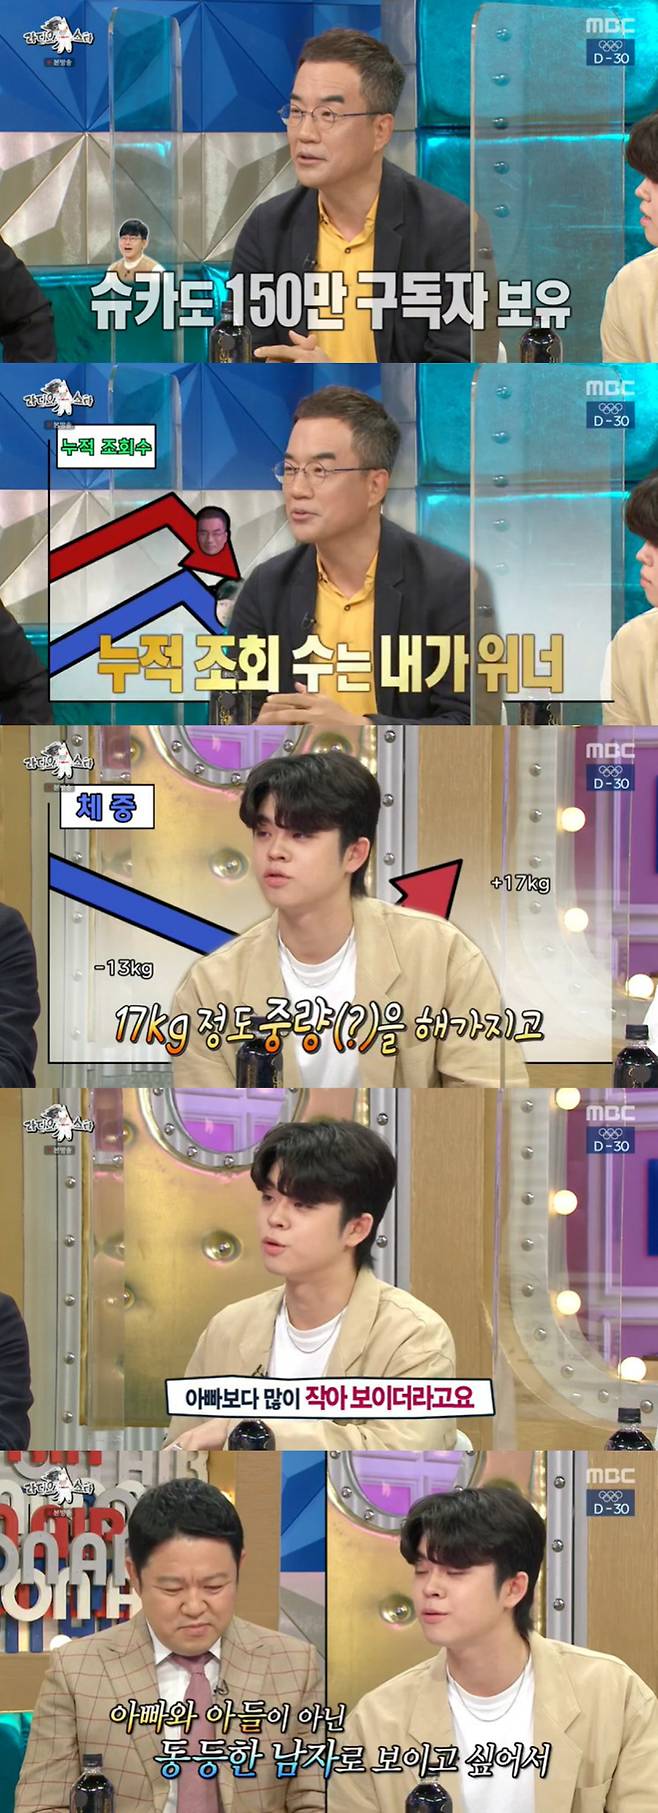 Radio Star powerhouse reveals secret to becoming Share richKim Bo-sung, Kim Pro, Gri, and Shin Ah-yeong appeared as guests in MBC entertainment Radio Star broadcast on the 23rd.Kim Pro Kim Dong-hwan is the Share guide of Jurin. Kim Pros YouTube channel subscribers are 1.41 million and cumulative views are 300 million views.Hot economic mentor Kim Pro said, In March, the number of subscribers rose from 10,000 to 150,000. Fortunately, the share price has risen since then.Recently, the jurin say, Share rises unconditionally, but now is the best. Im worried that Share could plunge.So nowadays, I teach about Share events and posture rather than market conditions. Grie recently lost 13kg, increased 17kg and succeeded in bulk-up; Father Kim Gu also testified that he was crazy with exercise these days.Kim Gu said, I cut off the gym to keep my health. At that time, I did not go to school, but I was stuck.If I stand next to Father, it looks a lot smaller than Father, I wanted to look like the same man, Grie explained why he bulked up.I was sensitive to the headlines after the bulk-up, he said. I originally appeared as Kim Gus son in the article, but now Im called 17kg steamed.Husband of Shin Ah-yeong, who worked for United States of America, recently returned to Korea and the couple lived together again.Shin Ah-yeong said, Dont you want to see it most at the time youre away, you should have enjoyed that time a lot. You have to fit all the trivial things when you live together.I am alone and it is a blessing time, he laughed at Ahn Young Mi, who was in a similar situation.But Shin Ah-yeong is the first MBC Everlon Come on and Korea to go to United States of America last year to see Husband.I got off too, Kim Gu asked, You regret it now? and Shin Ah-yeong replied Yes in a daze.Shin Ah-yeong said, I do not have much work these days, so I am at home, and when I see a pair of Husband socks, it is so angry.Grie said he recently started Share and COIN, with COIN holding negative 37 percent and Share holding negative 3 percent yields, adding: Weve tried COIN for only 5 million won.I woke up and got up to 6.5 million won. So I put 500 more. I am waiting for the opportunity after the crisis. Shin Ah-yeong also bought COIN and erased the application.Kim said, It is okay to buy a good Share and erase the application, but COIN is not predictable.However, COIN and Shin Ah-yeong strongly recommended that COIN should be viewed for a long time.Shin Ah-yeong said he started his investment late and said, My father was in the financial side and could not invest directly.I invested 4 million won in Share and 5 million won in COIN to retire while investing indirectly. Shin Ah-yeongs father is a former financial chairman.I asked Father to recommend the event with 2 million won, but he told me not to bring it in the group unit, which means I do not want to teach him, Shin Ah-yeong said.In the midst of talking about Share, Kim Bo-sung was quiet. Kim Bo-sung said he had failed because of his loyalty to Share.Since then, many people have informed me that they will help me, but I missed it. I had only two events for 10 years, but I could not sell it because of that loyalty. Kim said that he sold Share, which he bought in 2008 for 40,000 won, for 200,000 won four years later. Do not you think Share is the best price ever when you buy a large-scale good stock?When you buy a large-scale good stock, you just buy it even if the price goes up. Jeon Won-ju, The Entertainment Warren Buffett, appeared as a surprise guest.At one time, people did not look at anyone, but nowadays, young children are happy to teach them, said Jeon.Every time I received a salary of 500,000 won, it was a securities company, a real estate, said Jeon. I felt the importance of money since I was a child.I started Share by collecting 5 million won. The main owner said, Do not sell it, collect it, wait for the loss. I see the possibility of the companys development; I also see the view of the people who recommended Share, said Jeon.I do not really use the individual people. I have not even turned on the house, so I have a meter reading center.World Bank has never gone to pick up money and only went to put it in. The power supply is sent to the World Bank to pick up the car. The power supply has never picked up the number tag. The employee calls and asks when the time is okay.If you are okay on this day, the branch manager comes in the car. There is my room. There is a field that does not spare a lot of power, he said, Even if a person is old, he should not be ugly. Jeon Won-ju recently took on a new challenge as a singer. Jeon Won-ju said, My mother should be pretty and I dont know what kind of singer she is.Chunhyang, Wolmae, and Hyangdanro group, he said. I am very excited. Husband, a former talent junior, went to raid the detective and cabaret.But I wanted to dance too much. My junior said, Did you come to the Sister dance? And finally the kite was cut off. Grie revealed his special relationship with Jin-kyeong Hong, who said: My mother was looking for a stable job and was looking for a business without a business.I contacted Jin-kyeong Hong Sister, who had no one-sidedness in the hope that she would be good. Thankfully, she accepted that she was good.I contacted Kim Soo-mis grandmother a while ago and the meeting was concluded. 